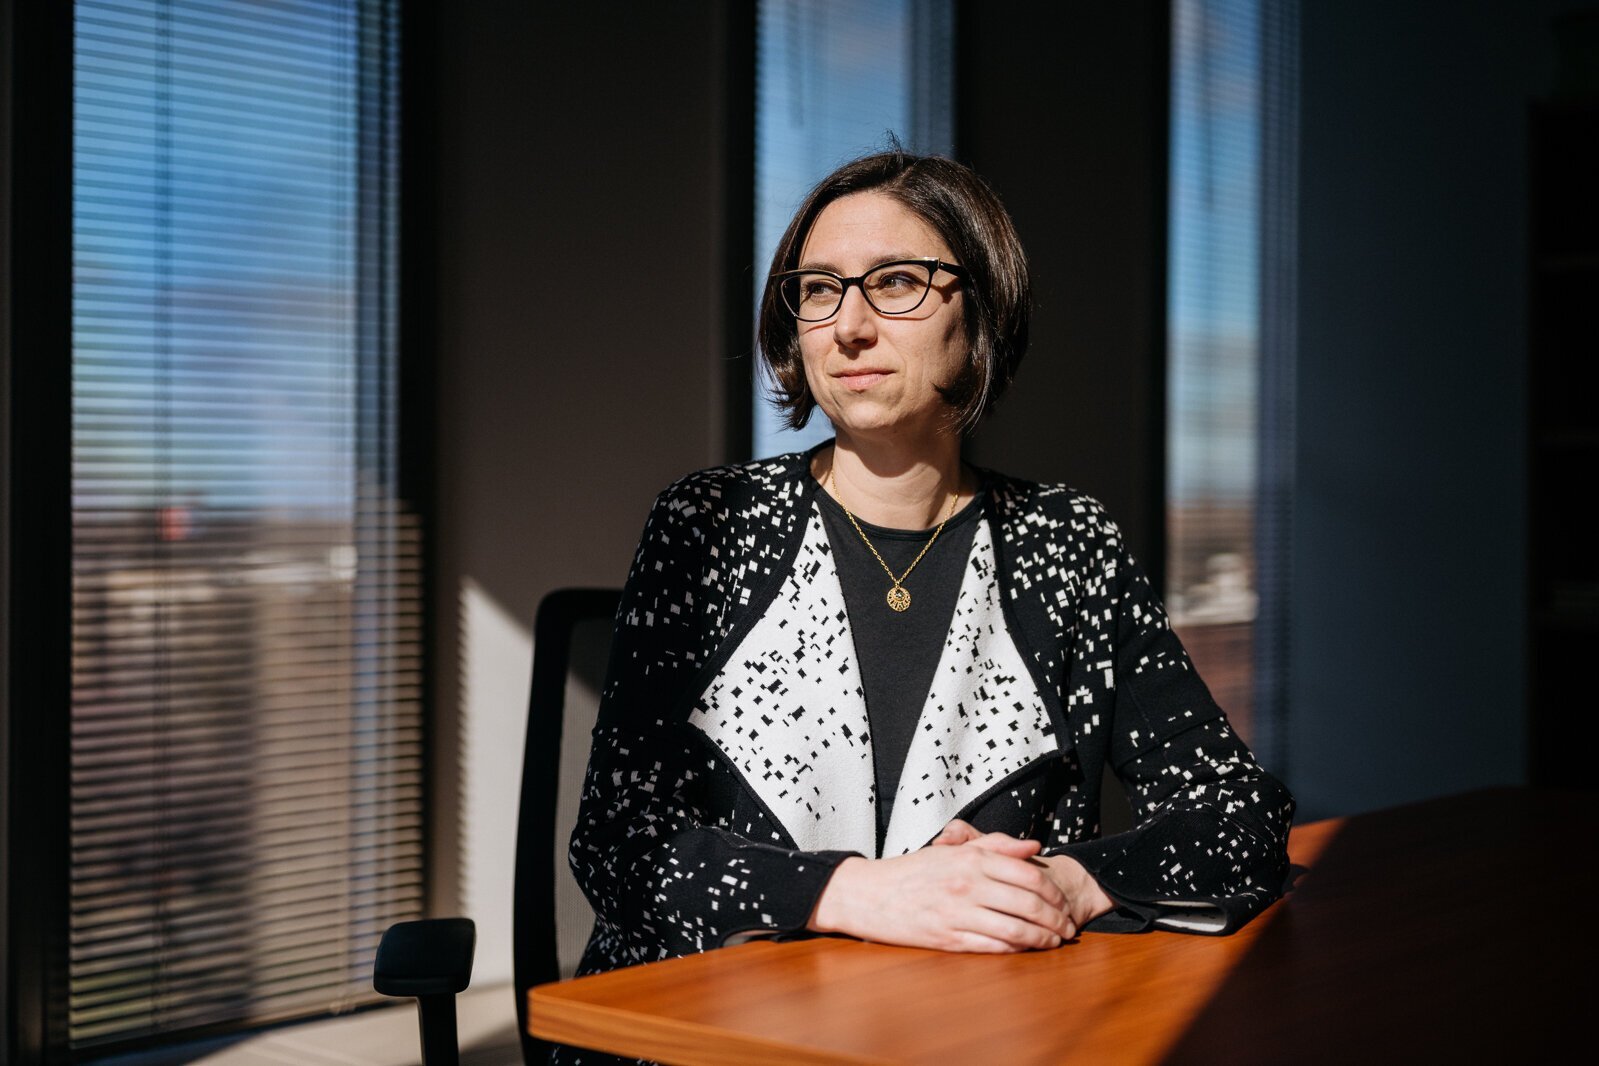 Christine Sauvé works in policy, engagement, and communications for the Michigan Immigrant Rights Center, which worked with Michigan Sen. Stephanie Chang to draft language access legislation.